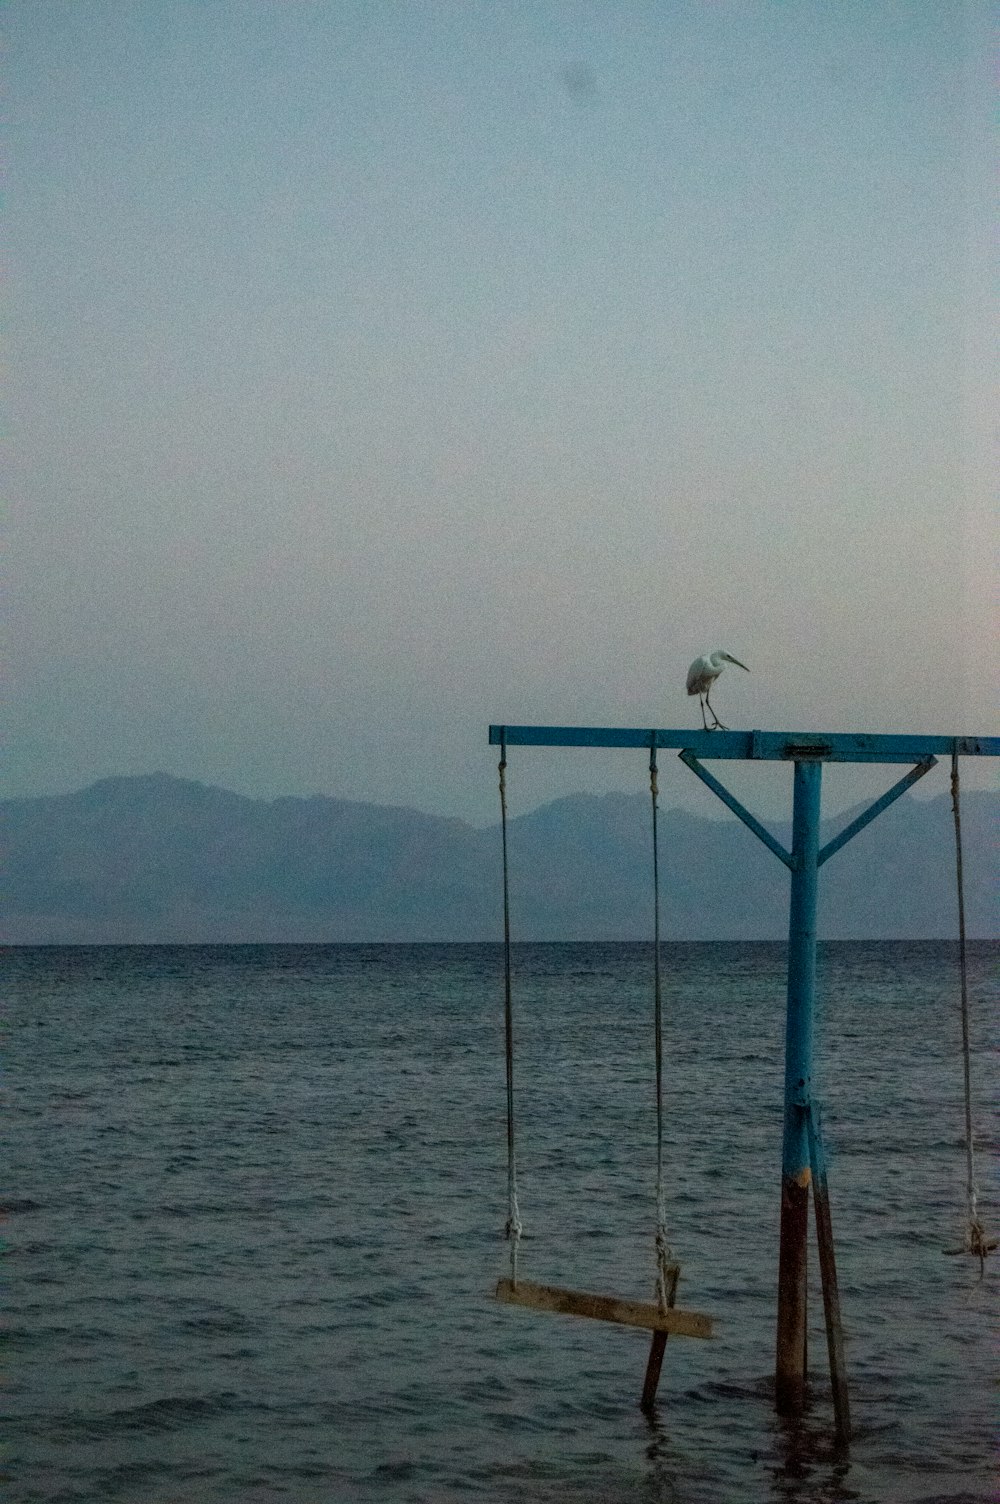 a bird is sitting on a swing in the water